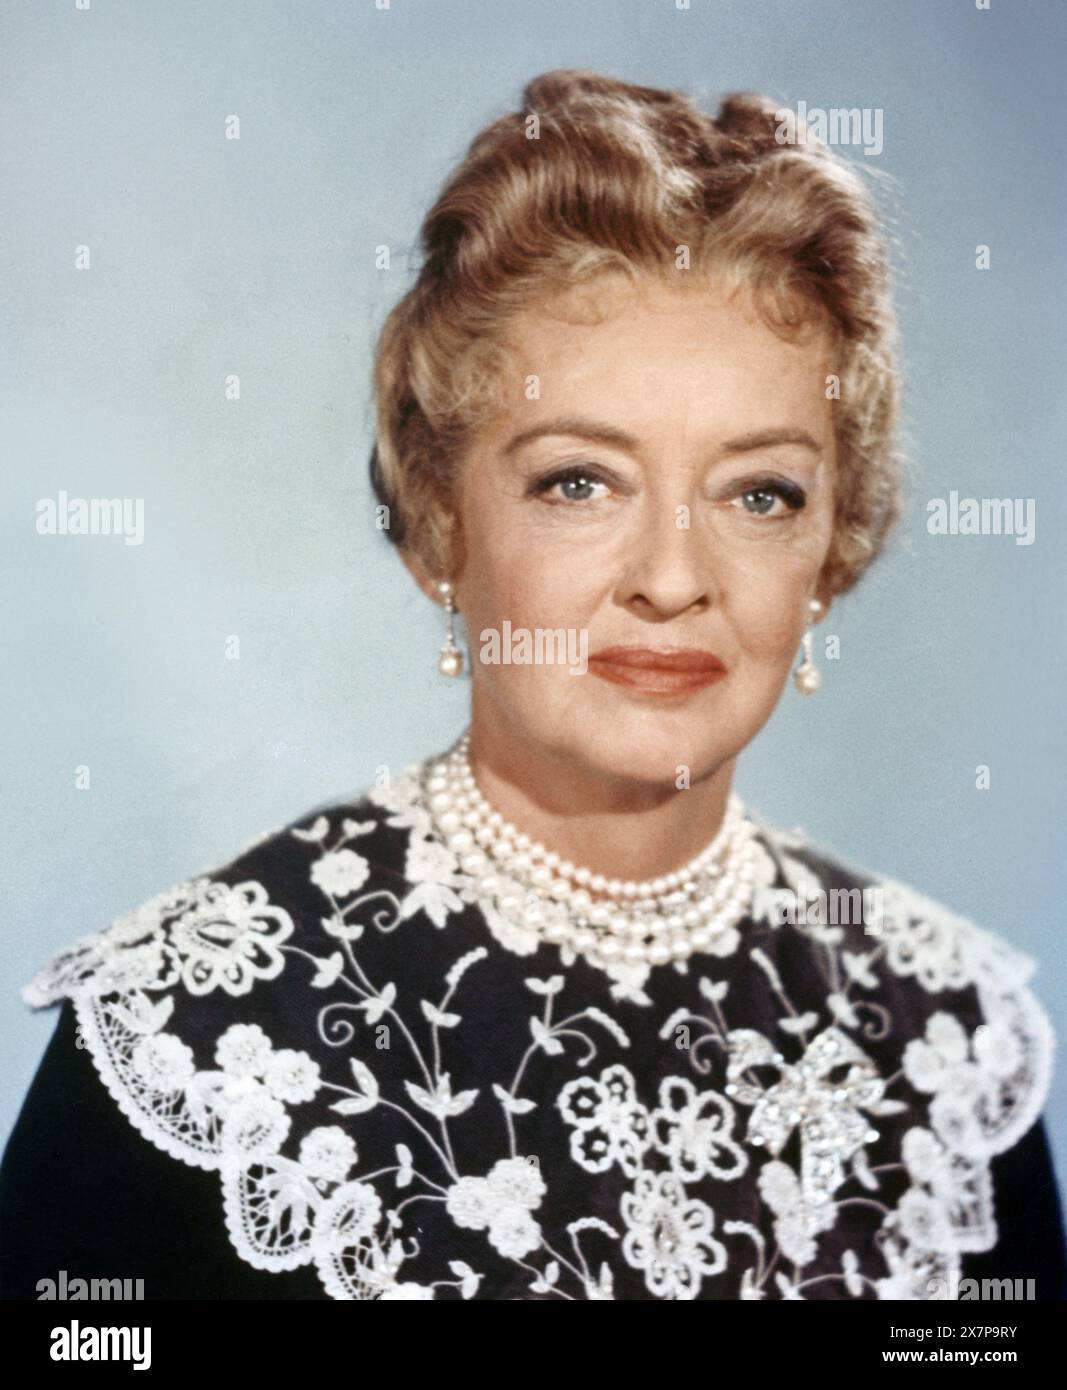 Pocketful of Miracles - Milliardaire pour un jour 1961 directed by Frank Capra; Frantom Productions / United Artists; Bette Davis COLLECTION CHRISTOPH Stock Photo